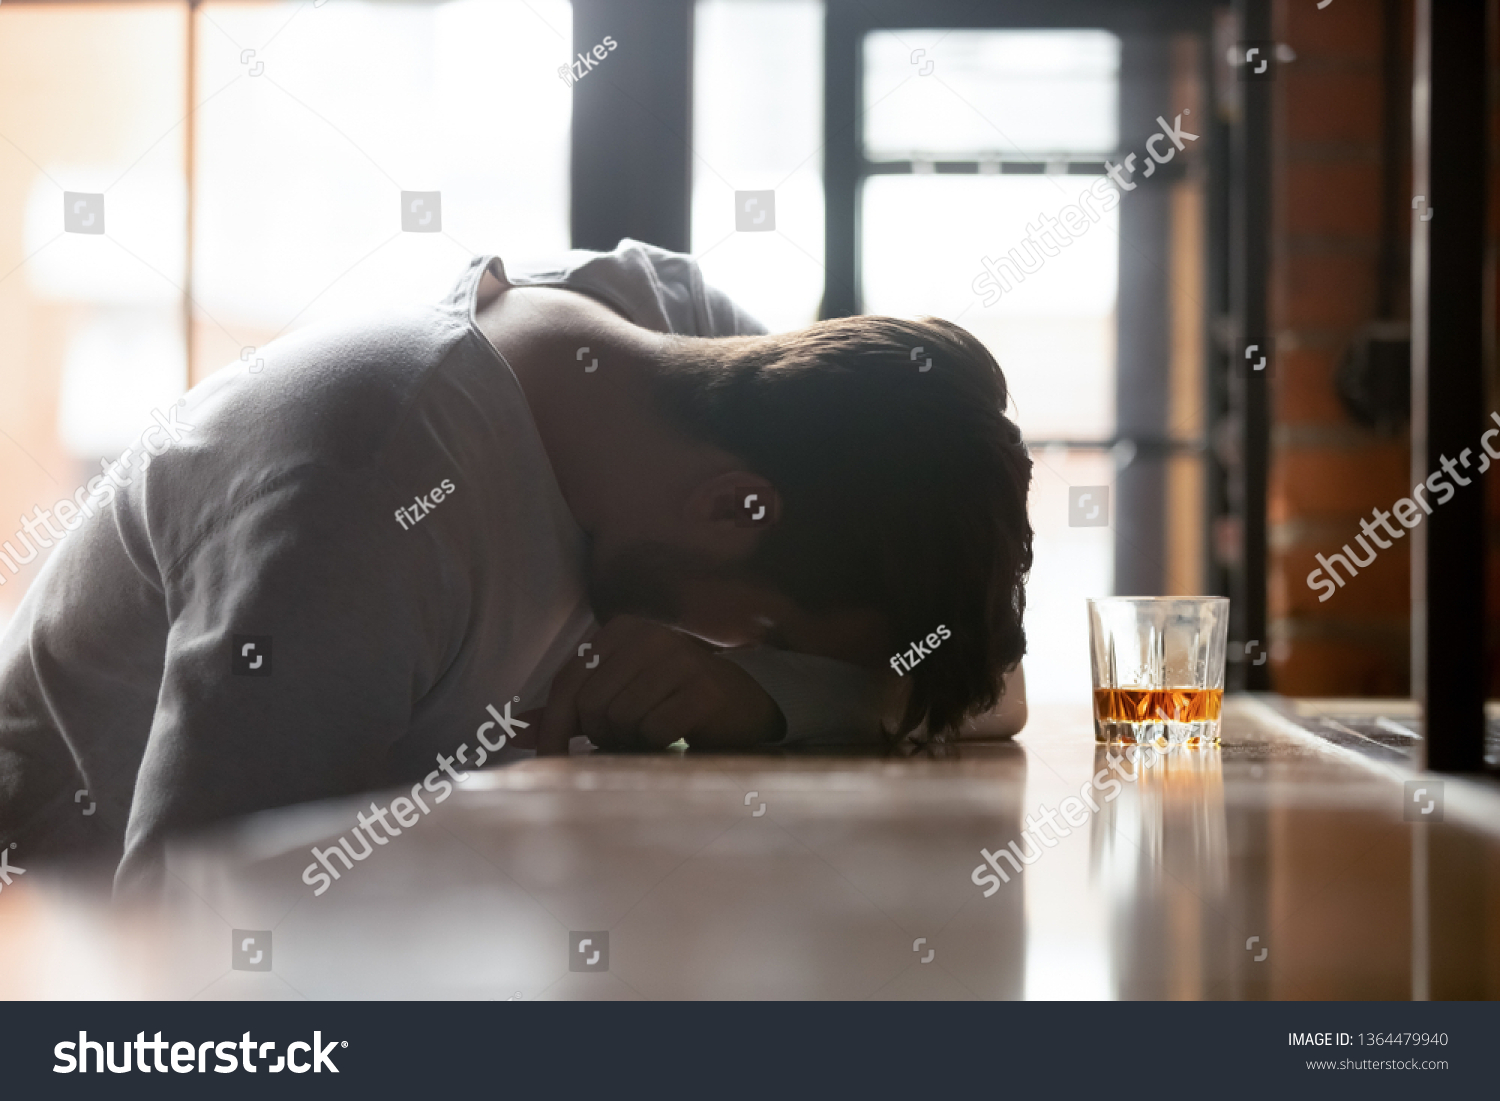 Drunk boozy man sleeping lying on bar counter after drinking large amount of alcoholic beverage glass of whiskey strong booze near him, concept of alcohol use disorder (AUD) alcoholism health problems #1364479940